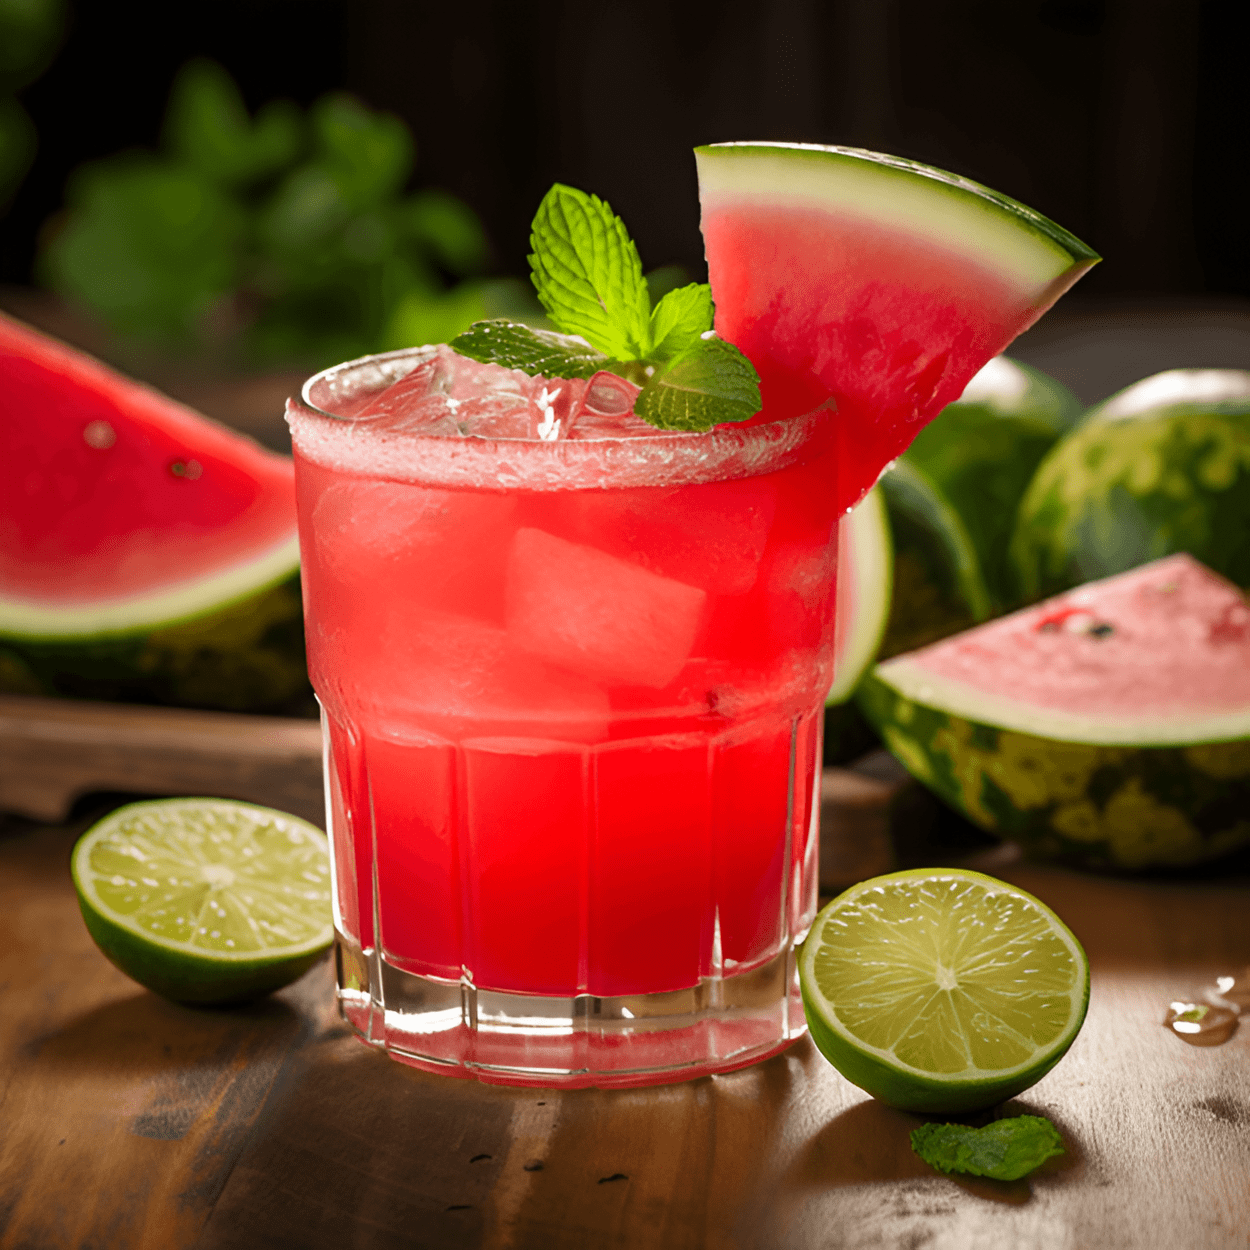 Johnny Vegas Cocktail Recipe - The Johnny Vegas cocktail is a sweet and sour delight. The tequila gives it a strong kick, while the watermelon liqueur and raspberry sour mix add a sweet and tangy flavor. It's a refreshing, fruity, and strong cocktail that's perfect for a night out.